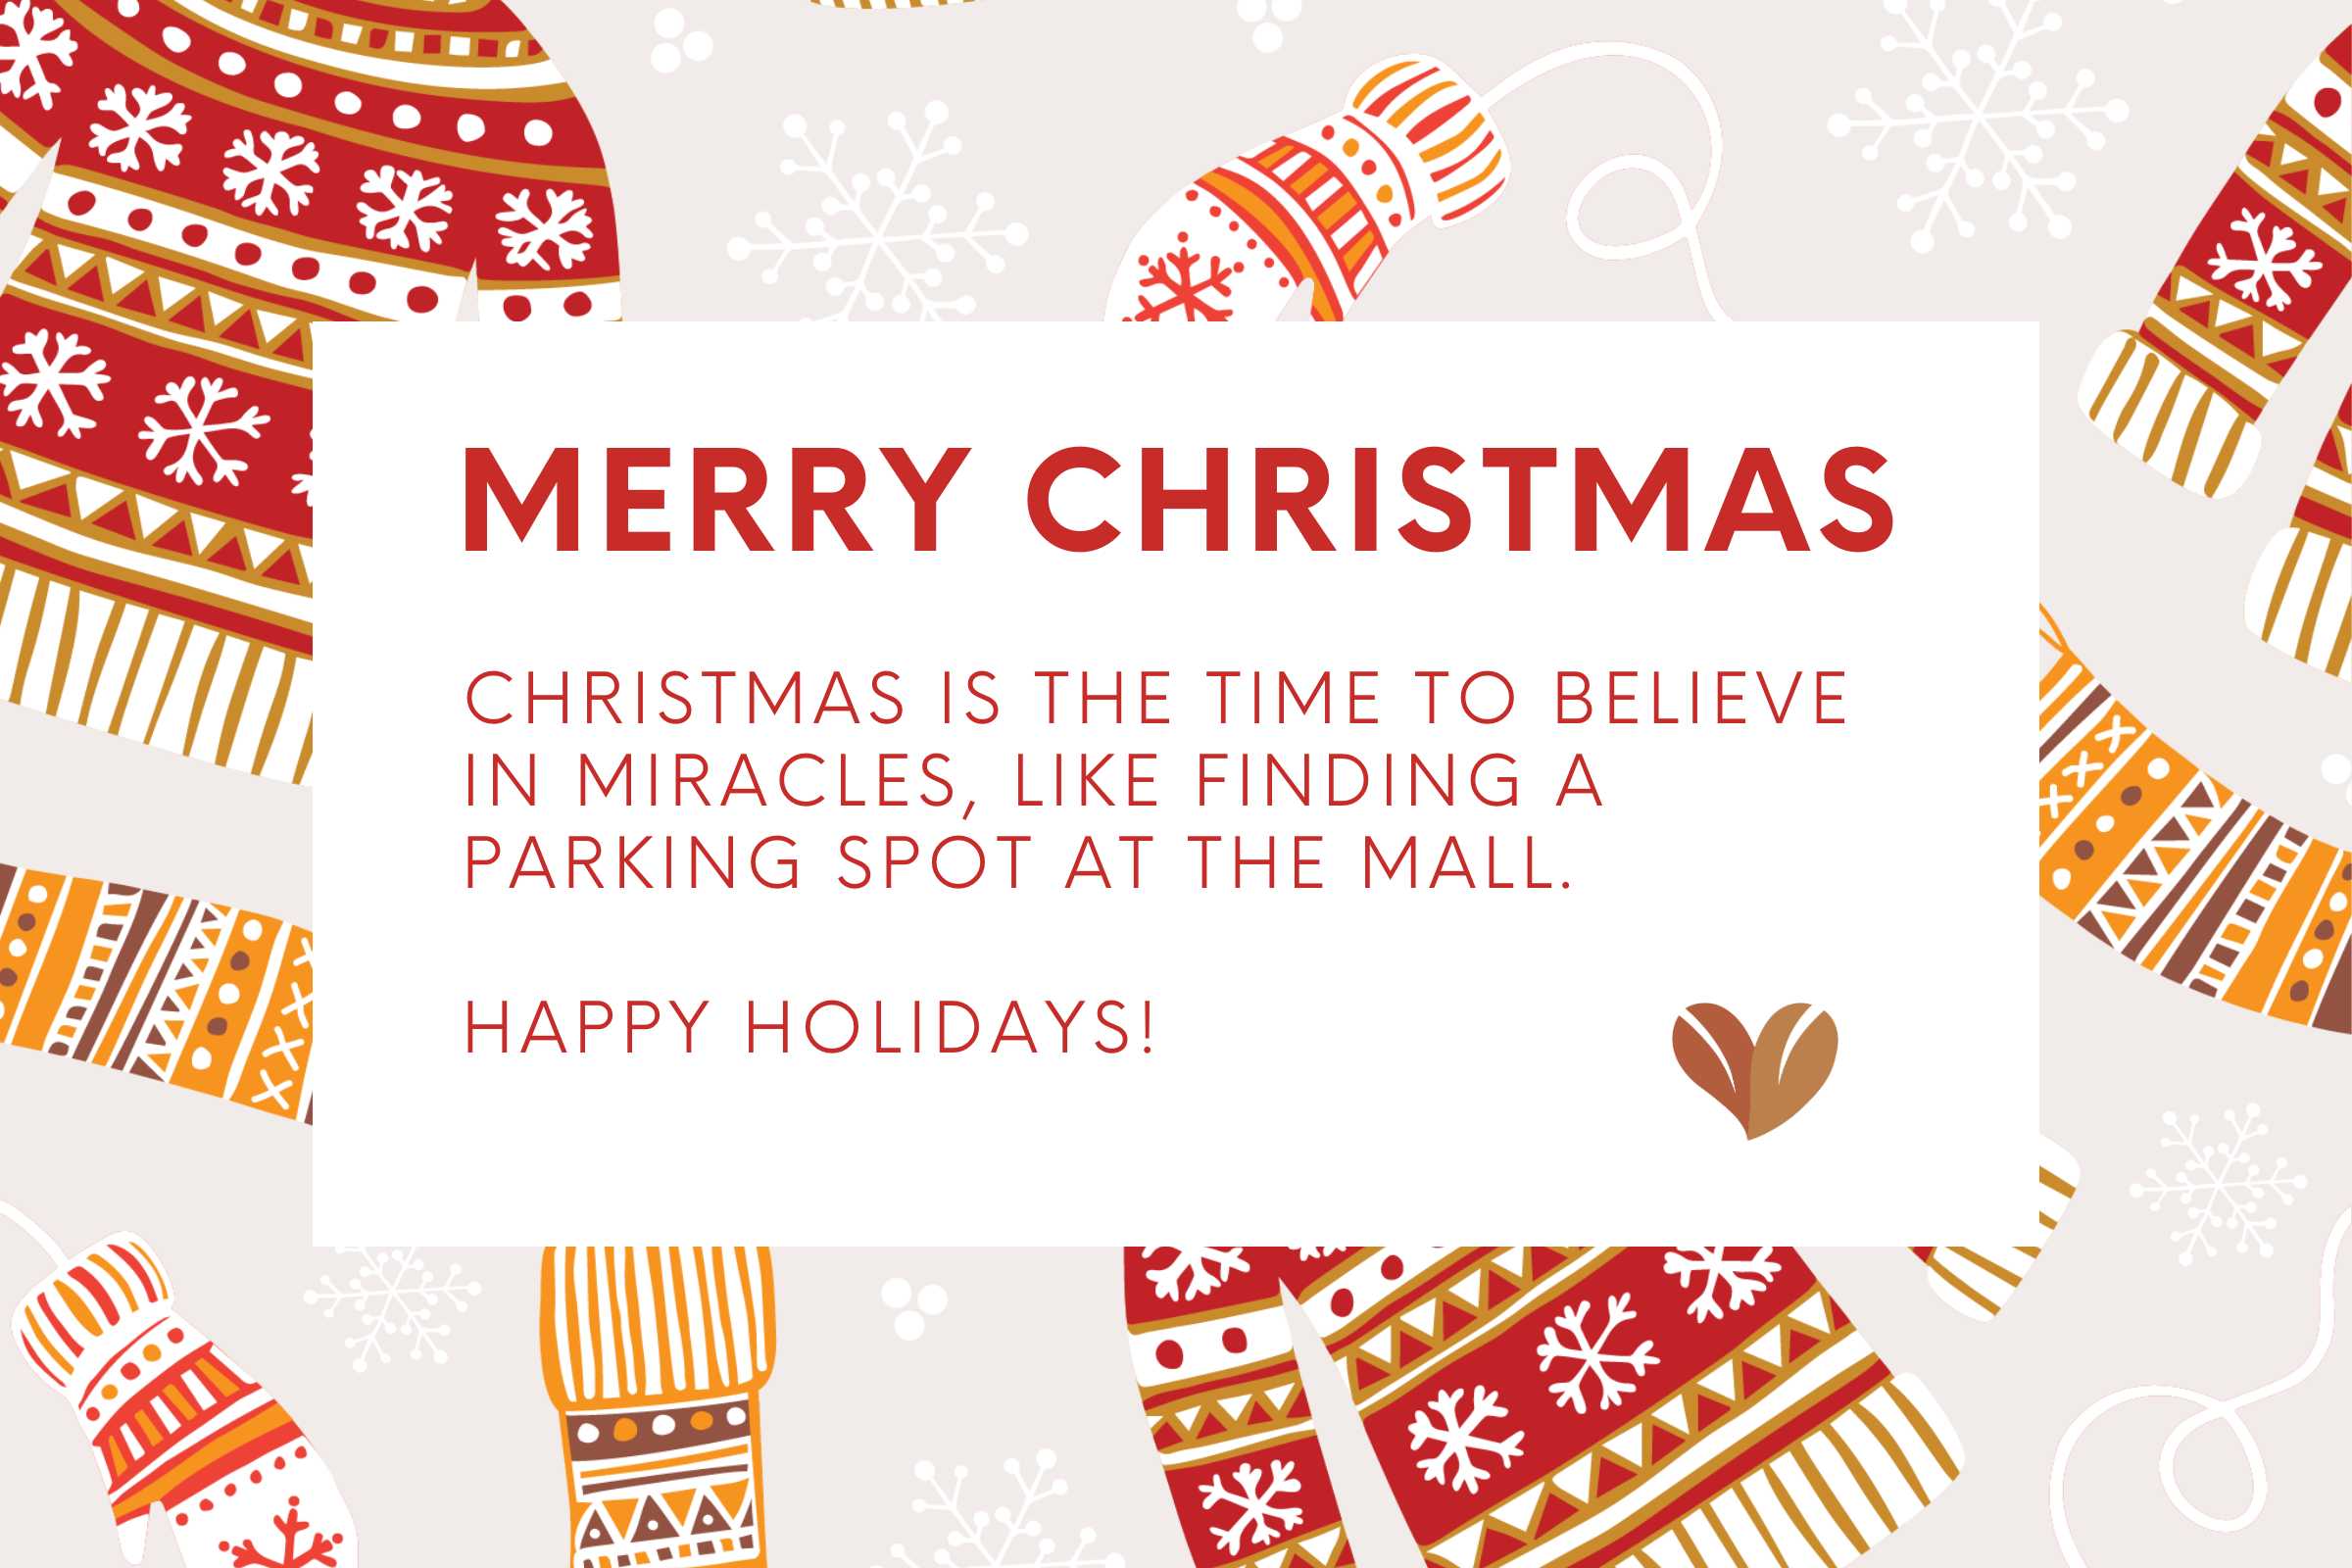 May your Christmas be merry with funny Christmas card sayings